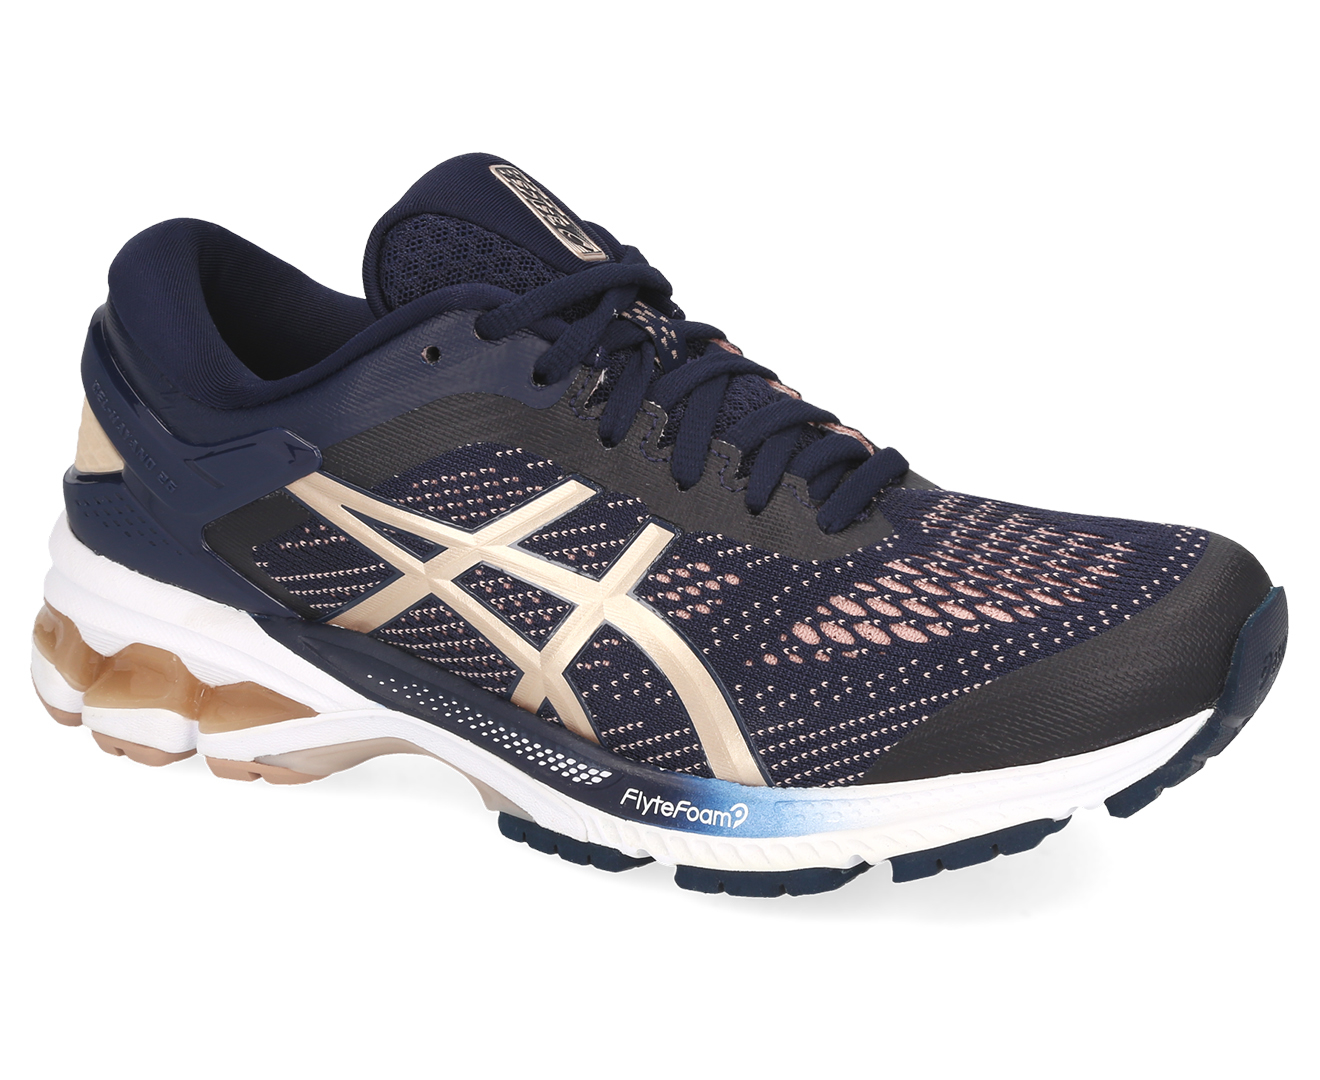 ASICS Women's GEL-Kayano 26 Running Shoes - Midnight/Frosted Almond ...